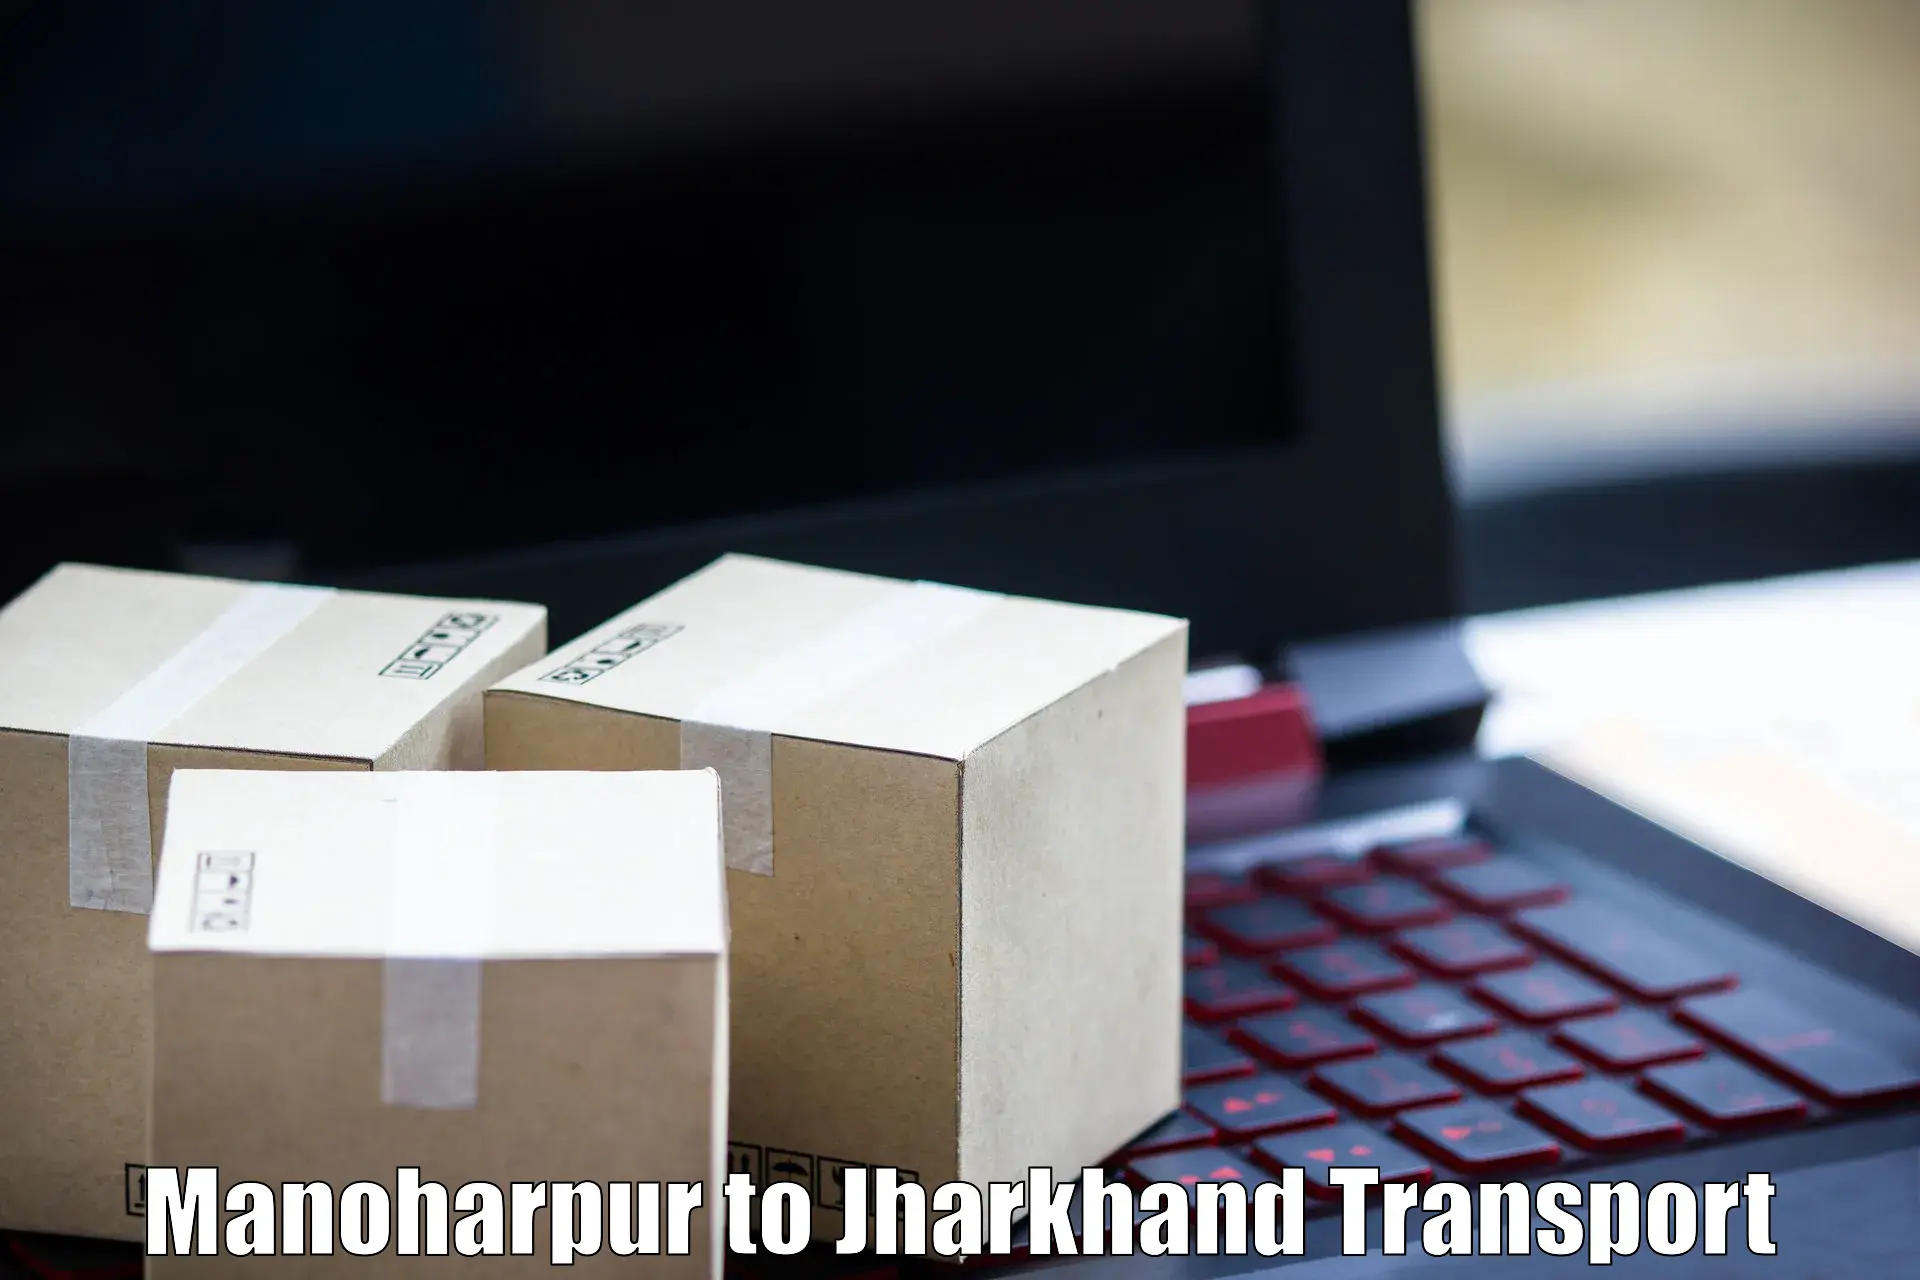 Delivery service Manoharpur to Jamshedpur